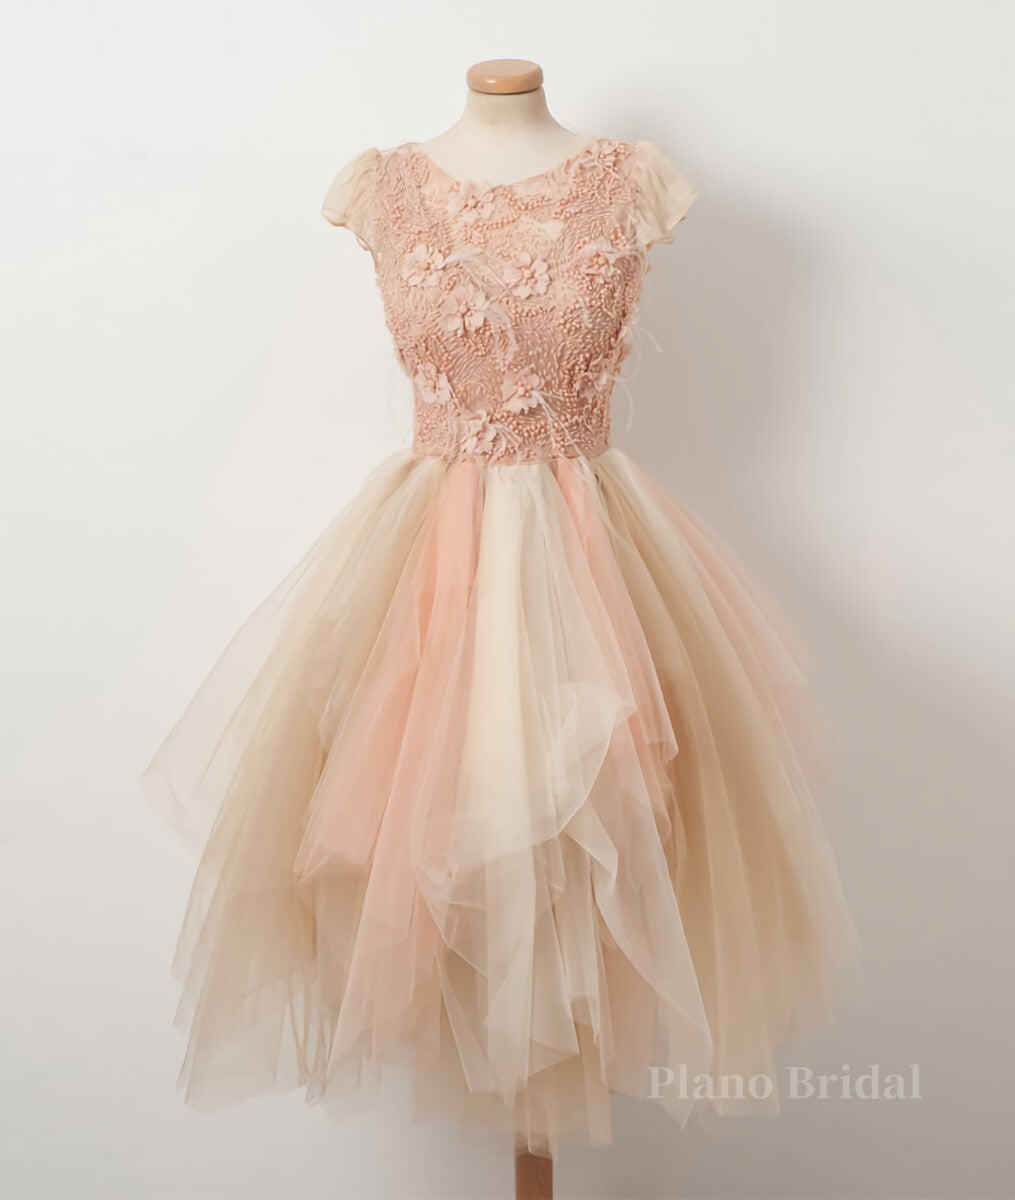 Champagne round neck tulle beads short prom dress, homecoming dress